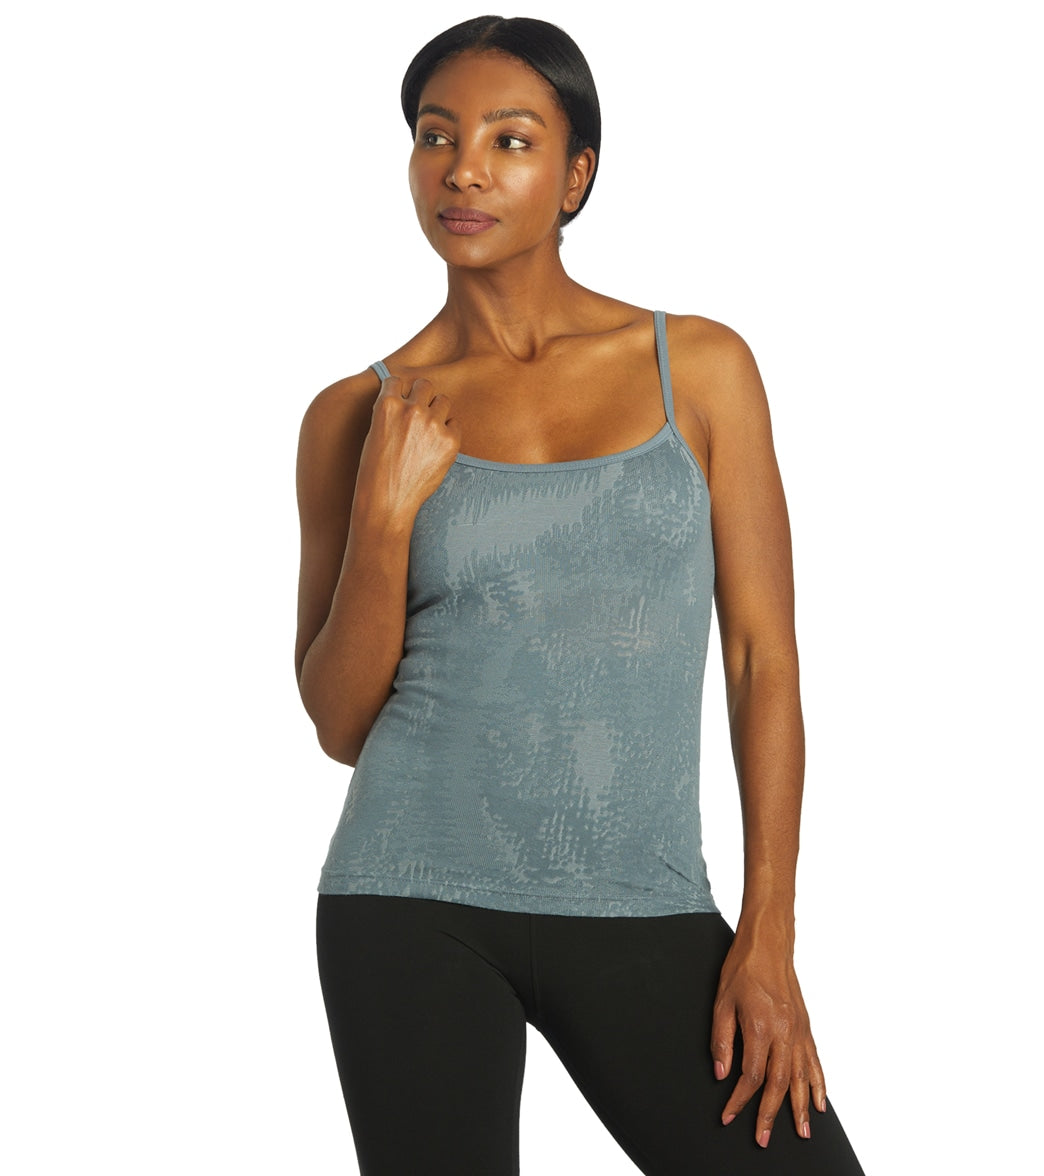 Hard Tail Scoop Back Yoga Tank Top with Bra